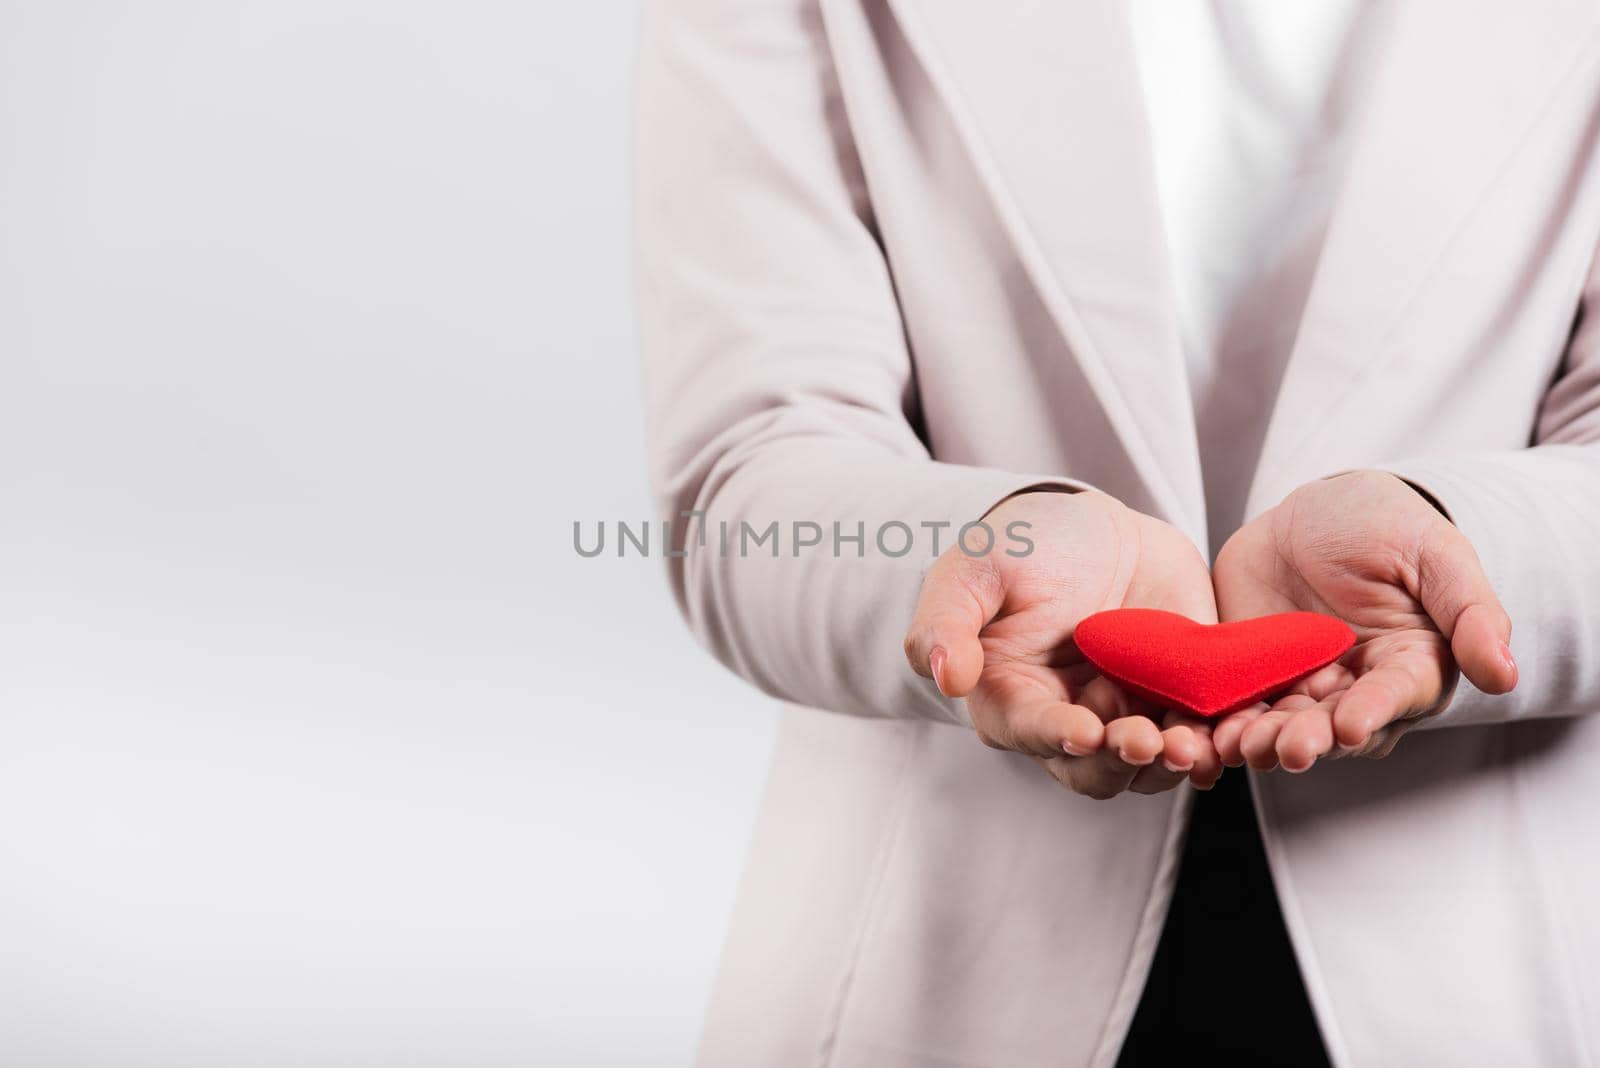 Smiling woman confidence showing holding red heart with her hand palm isolated white background by Sorapop